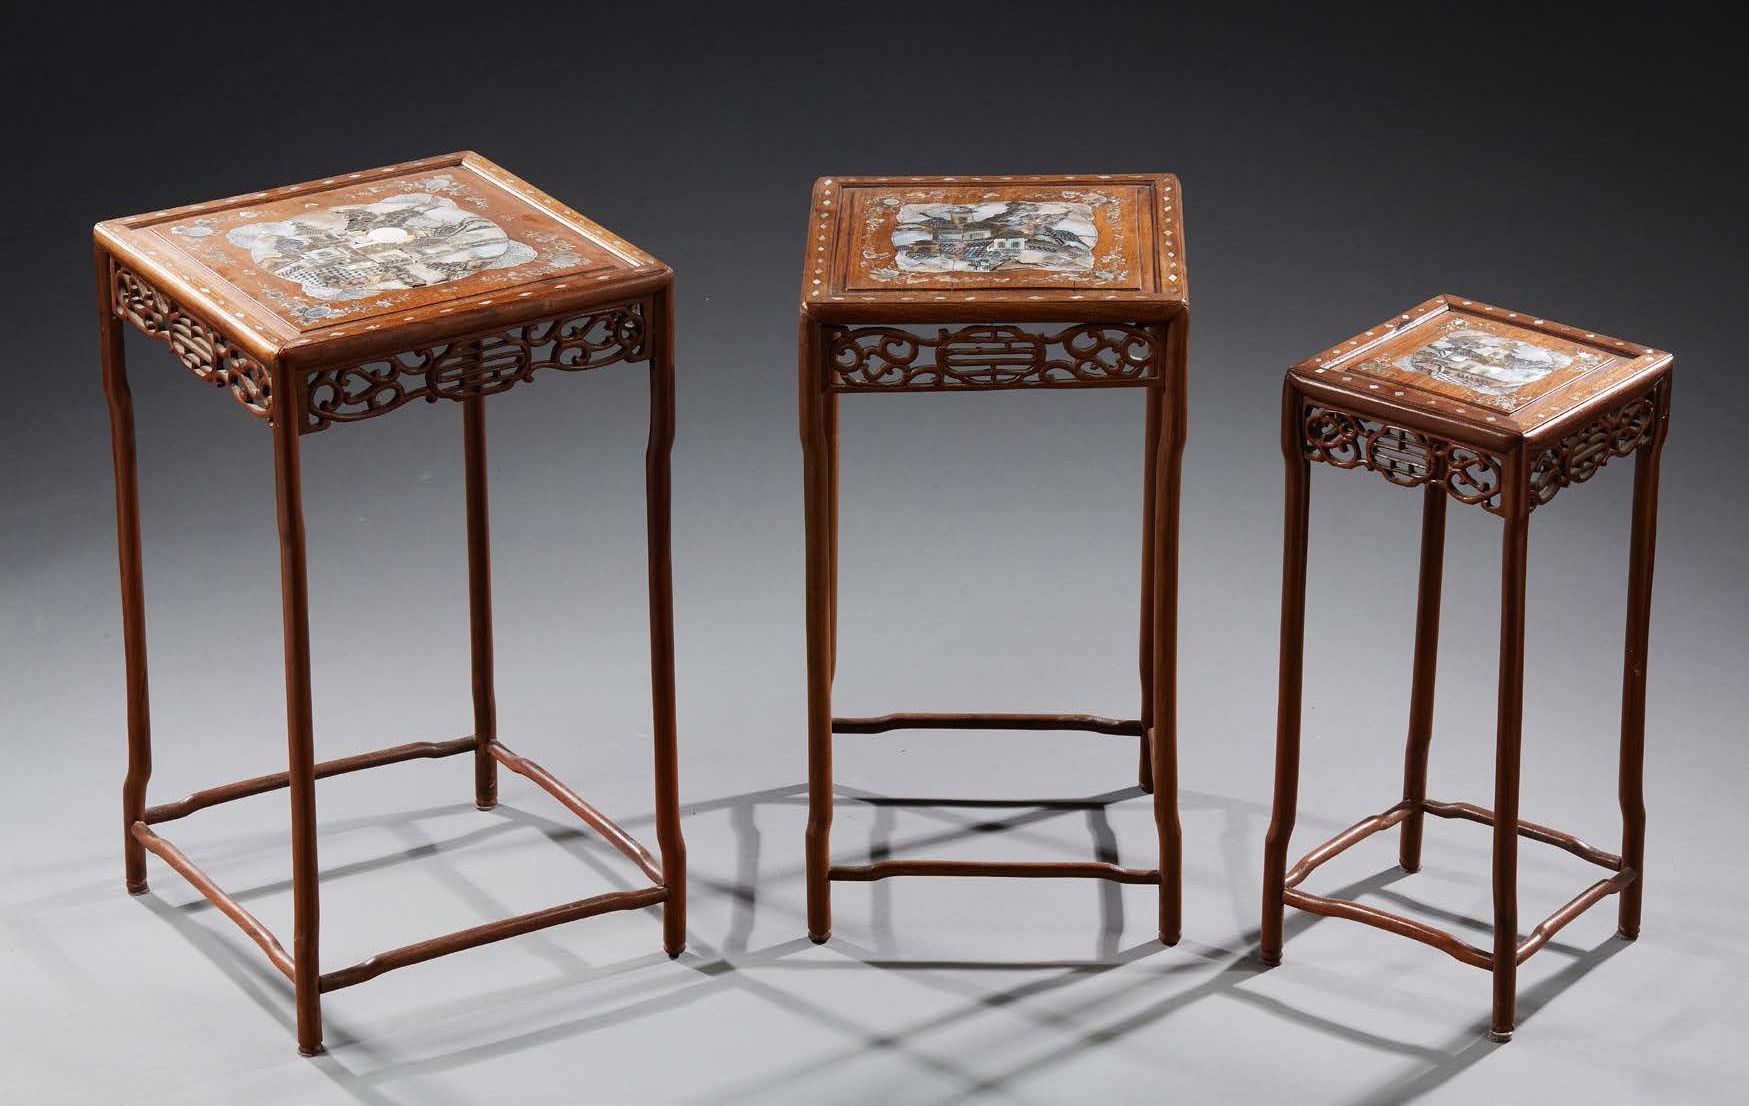 INDOCHINE Three nesting tables in wood inlaid with mother-of-pearl.
Around 1900.&hellip;